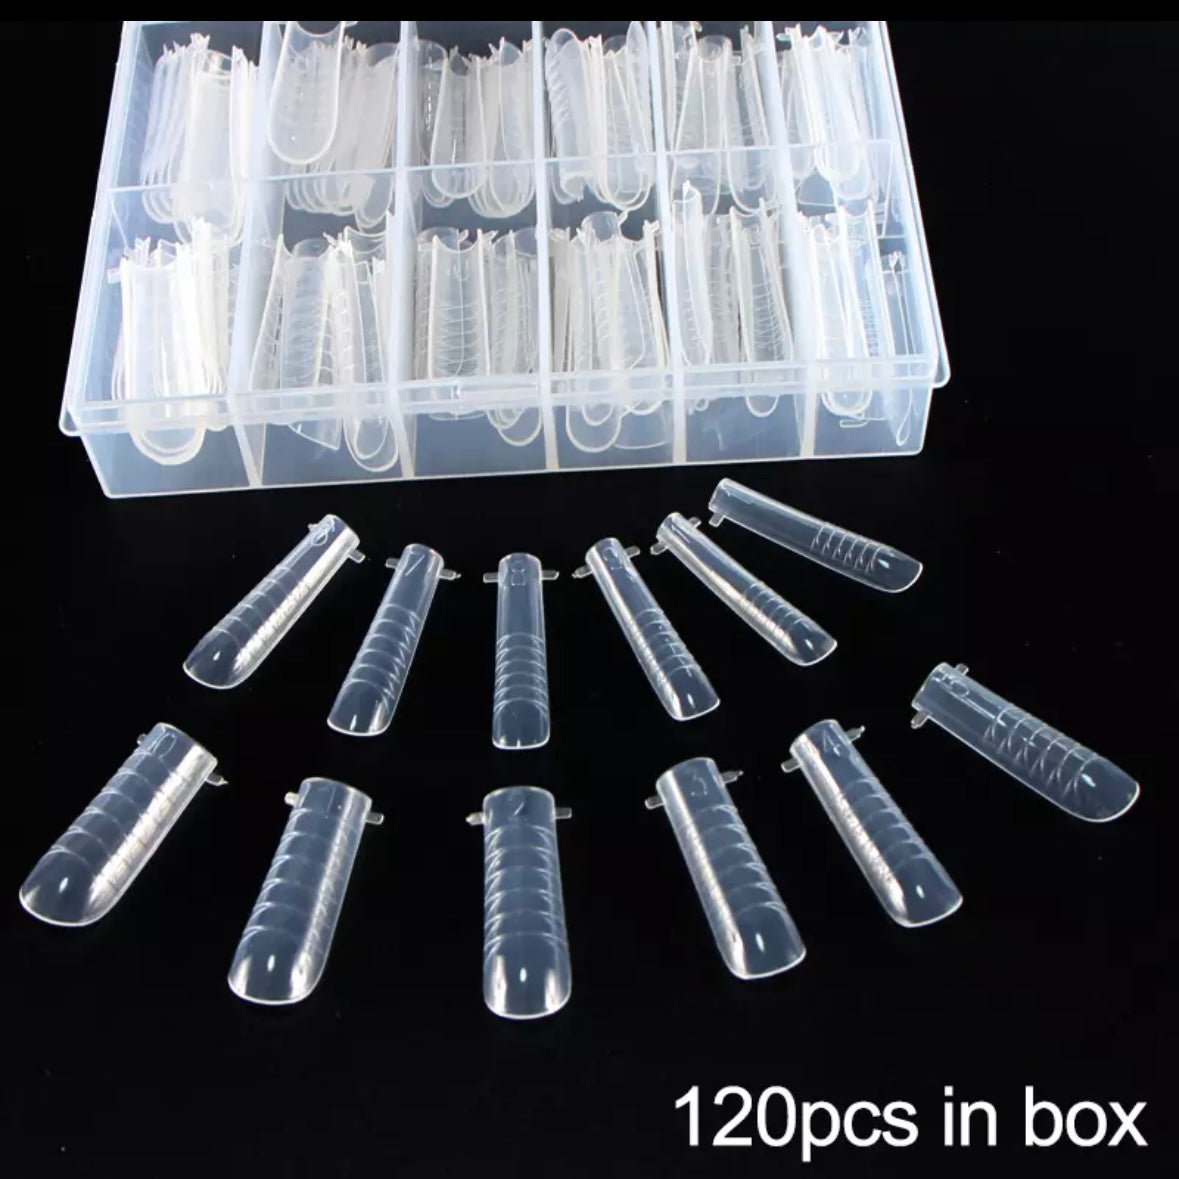 Dual Nail Forms #6 pointy clear for acrygel, polygel, 120pc